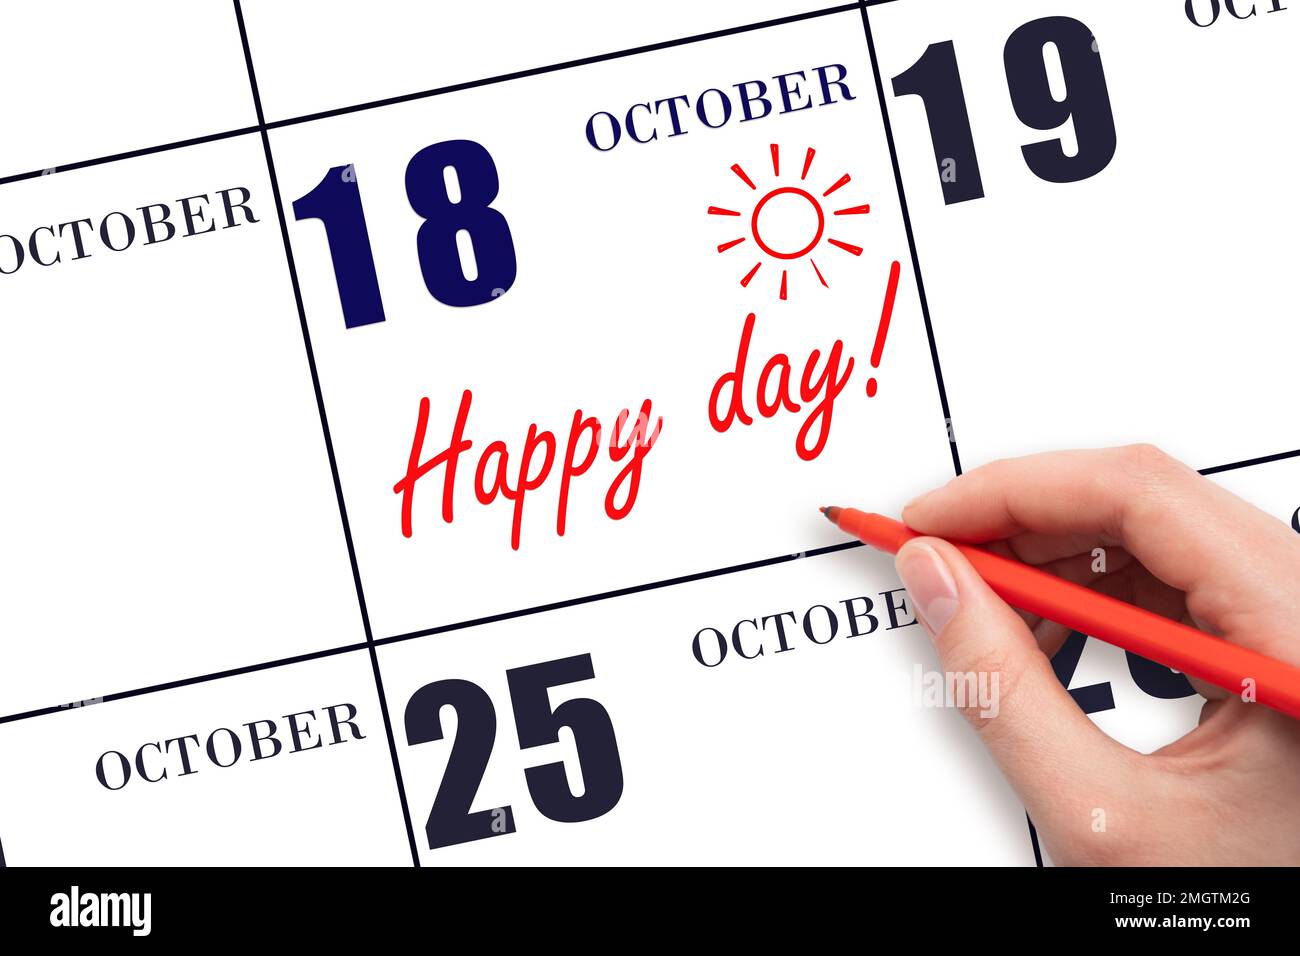 18th day of October. Hand writing the text HAPPY DAY and drawing the sun on the calendar date October 18. Save the date. Holiday. Motivation. Autumn m Stock Photo